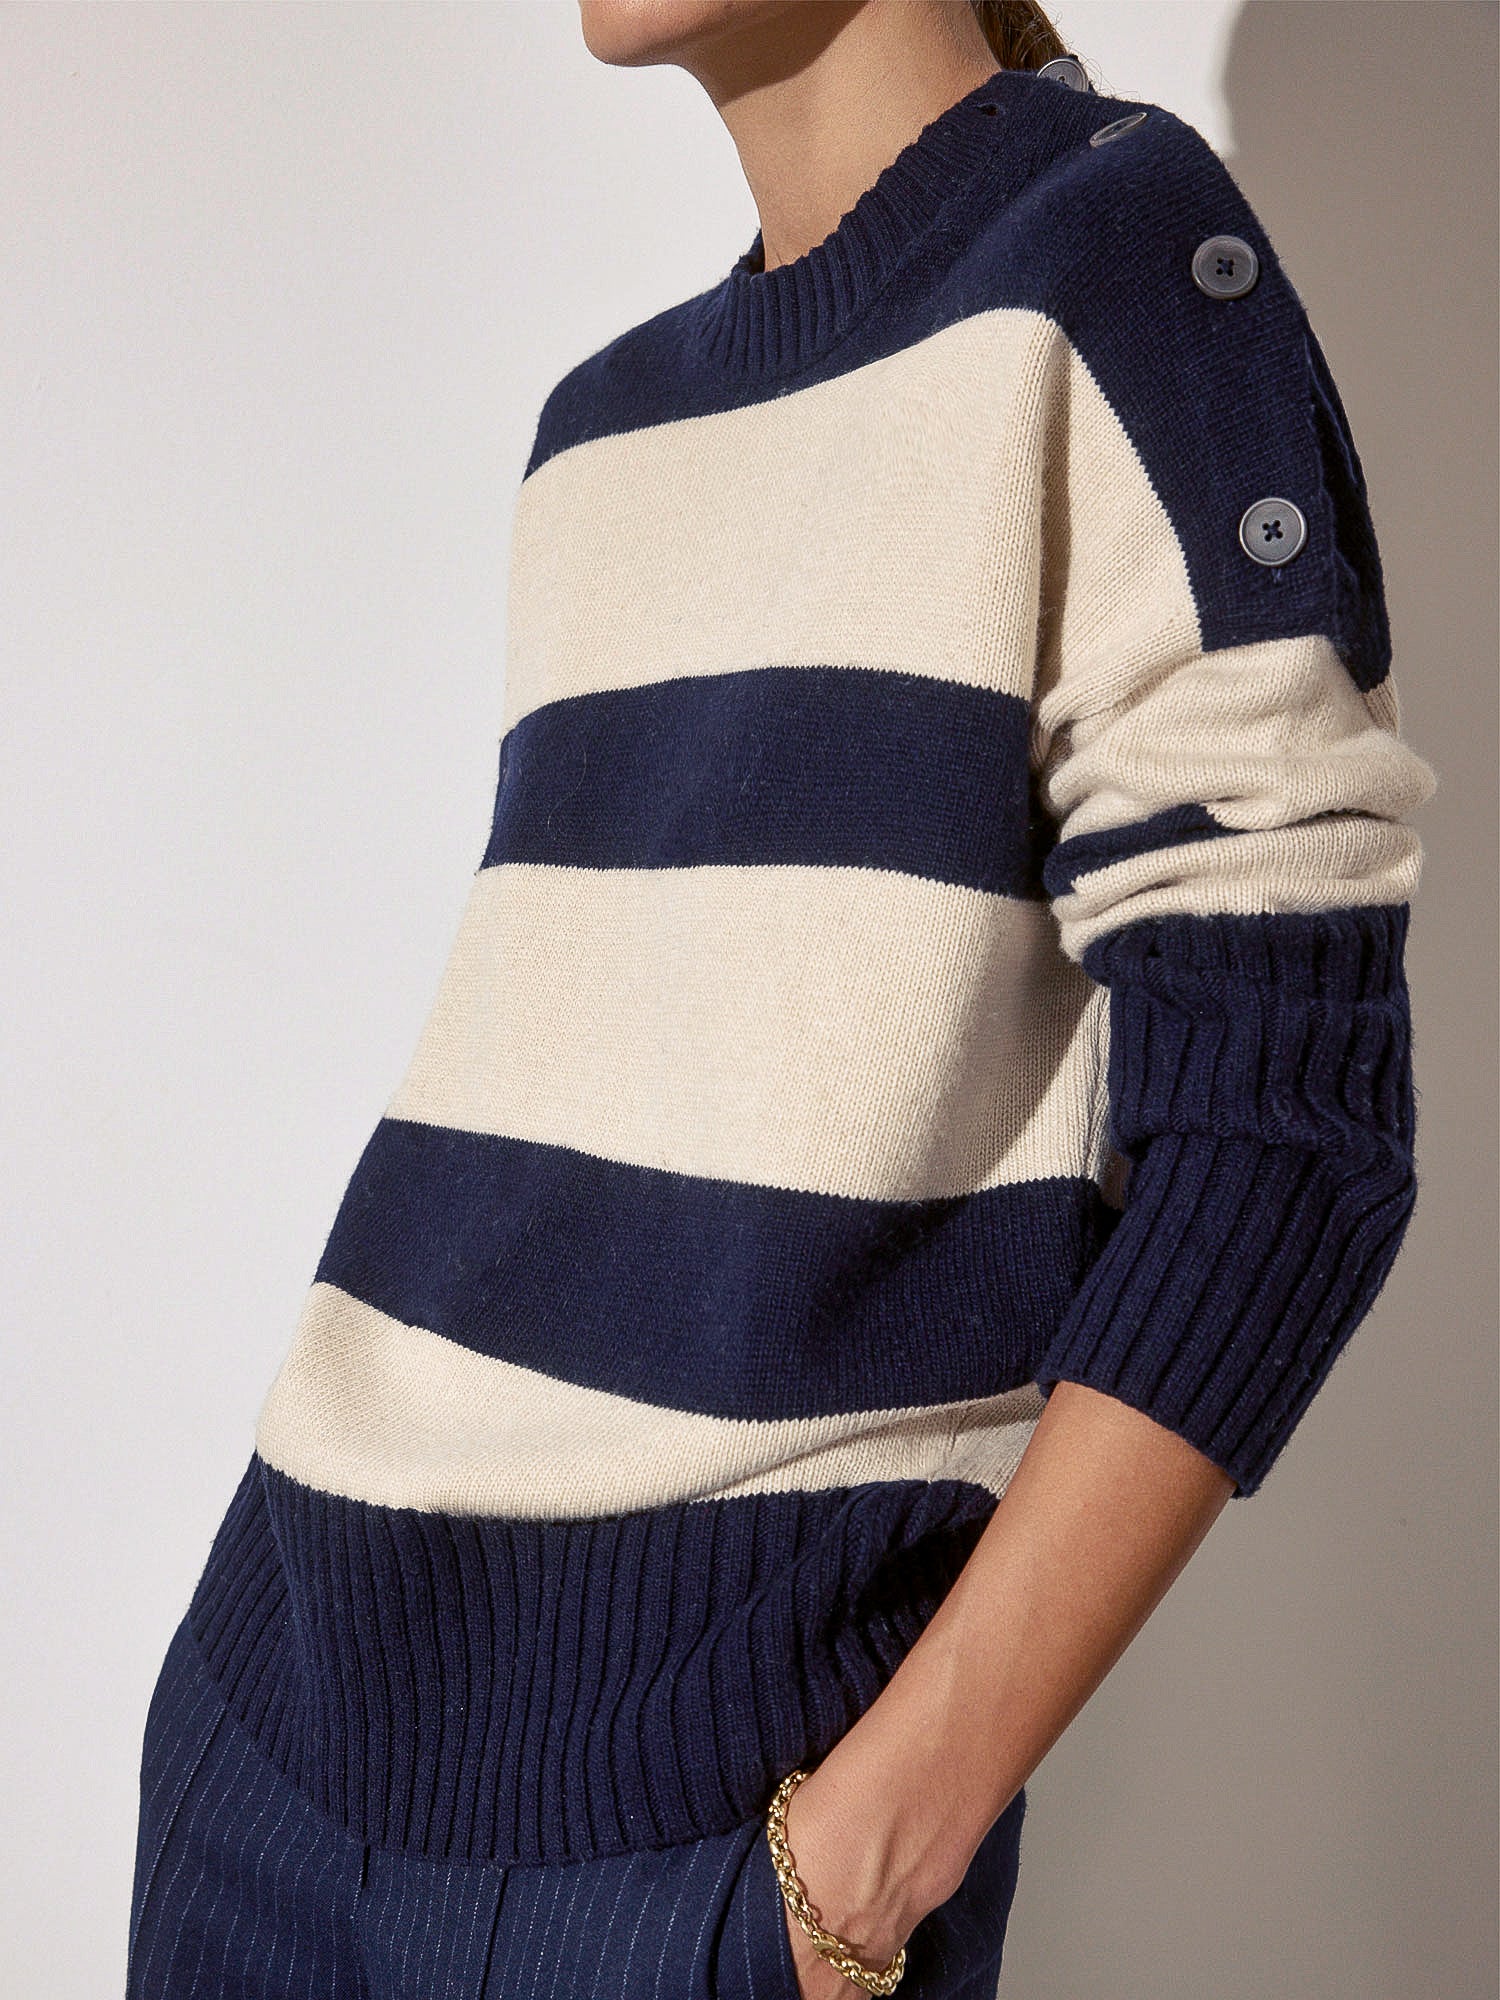 Cy navy and beige stripe crewneck sweater side view 2 